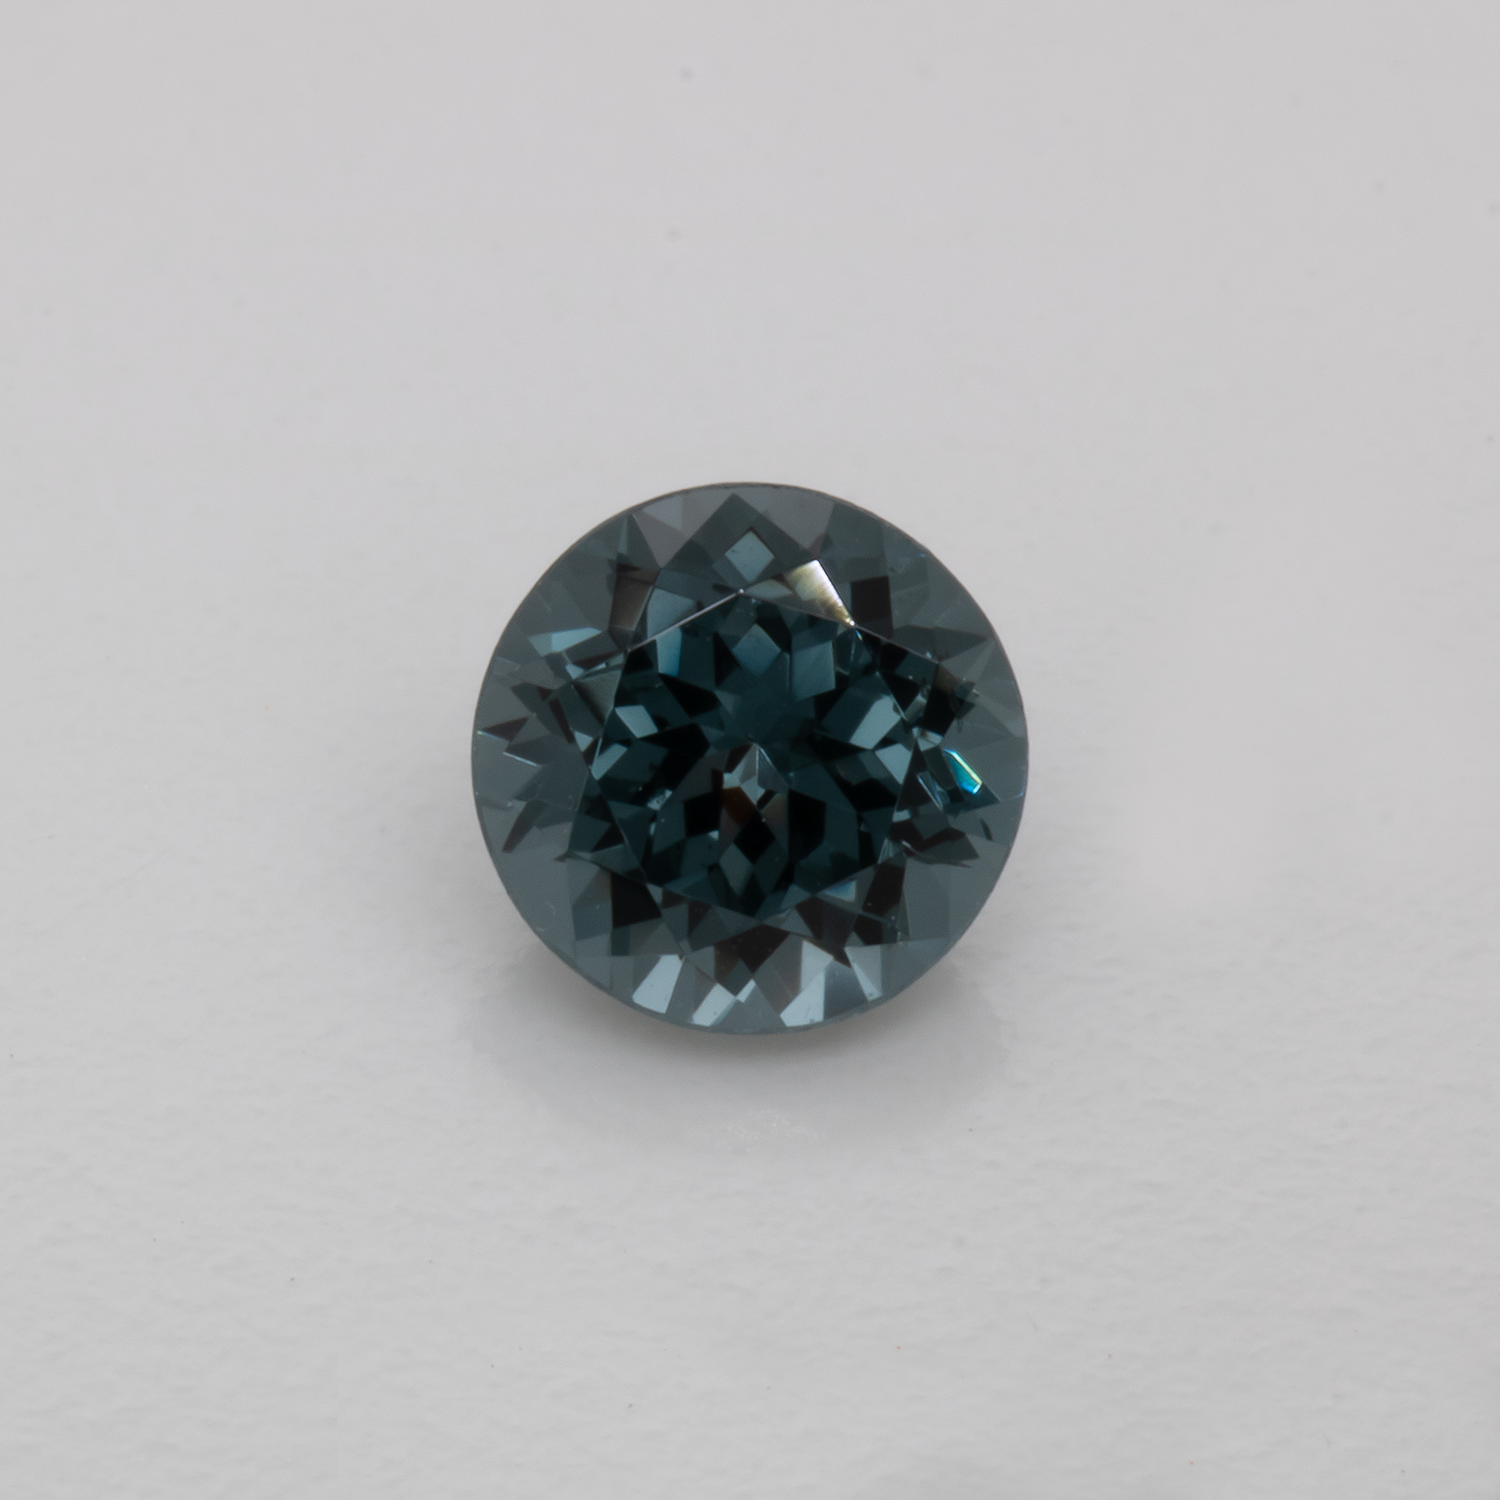 Spinel - grey, round, 5.1x5.1 mm, 0.60 cts, No. SP90056